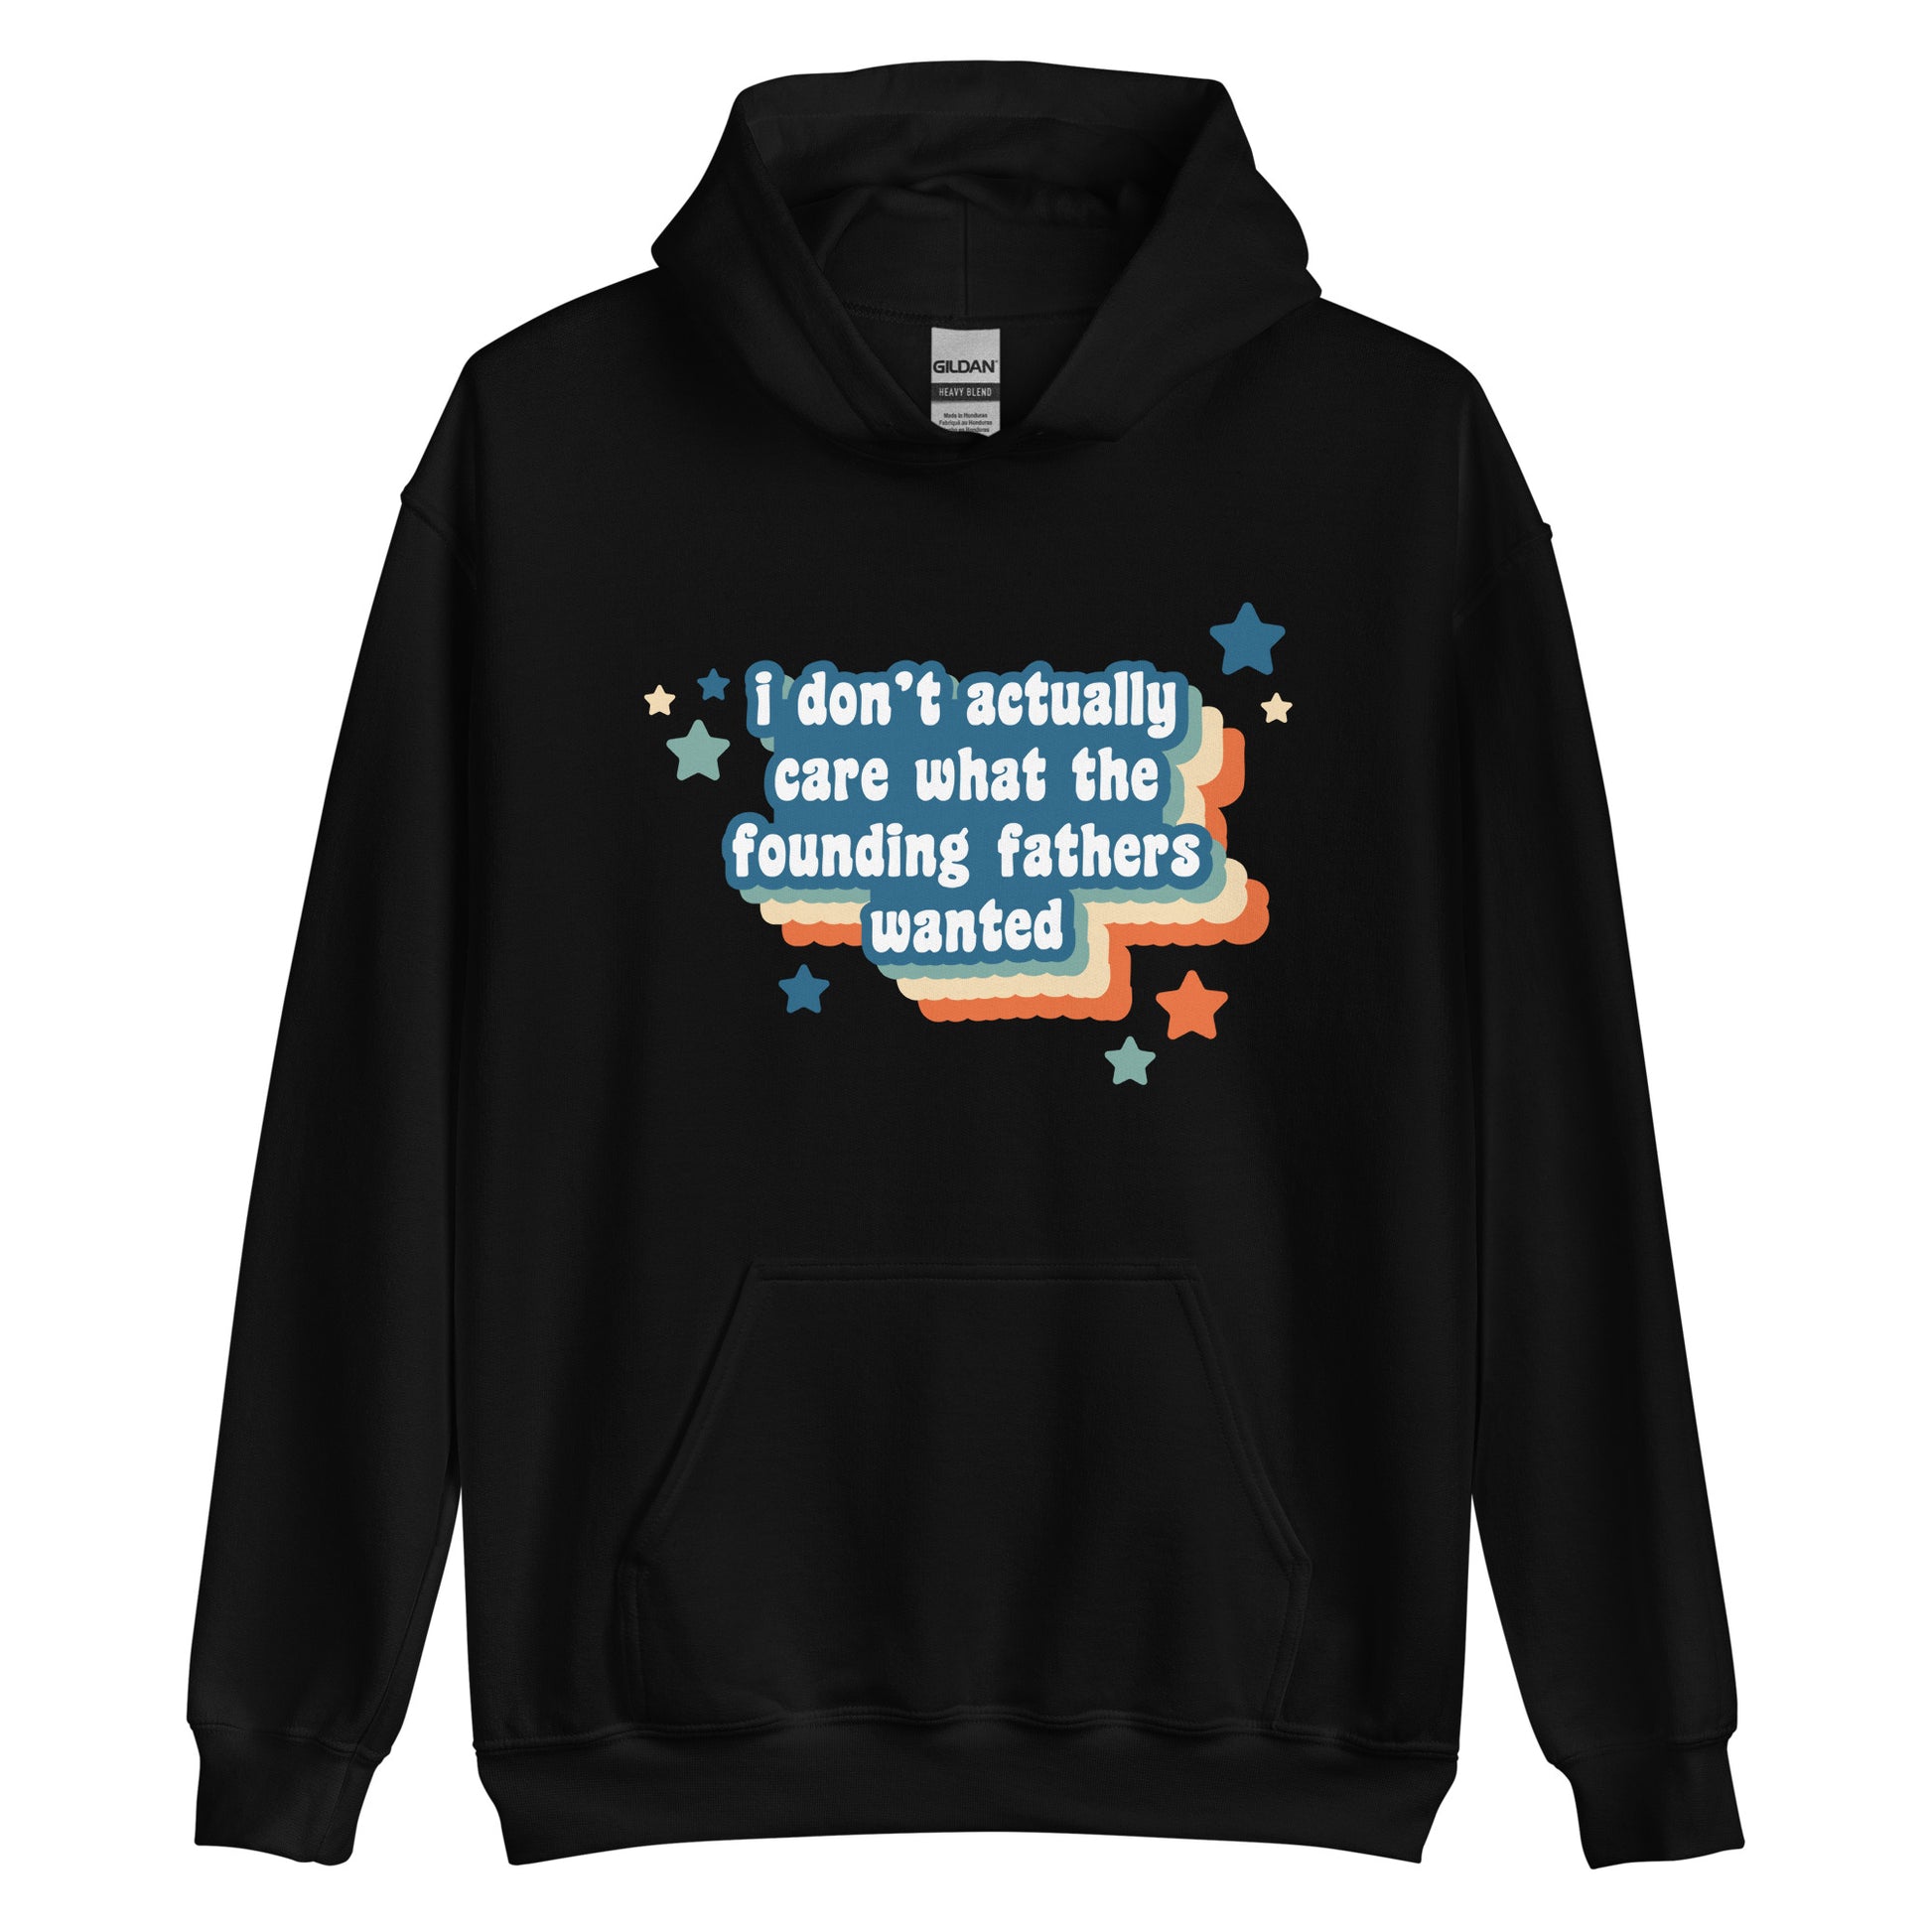 A black hooded sweatshirt featuring text that reads "I don't actually care what the founding fathers wanted". Stars and a colorful drop shadow surround the text.